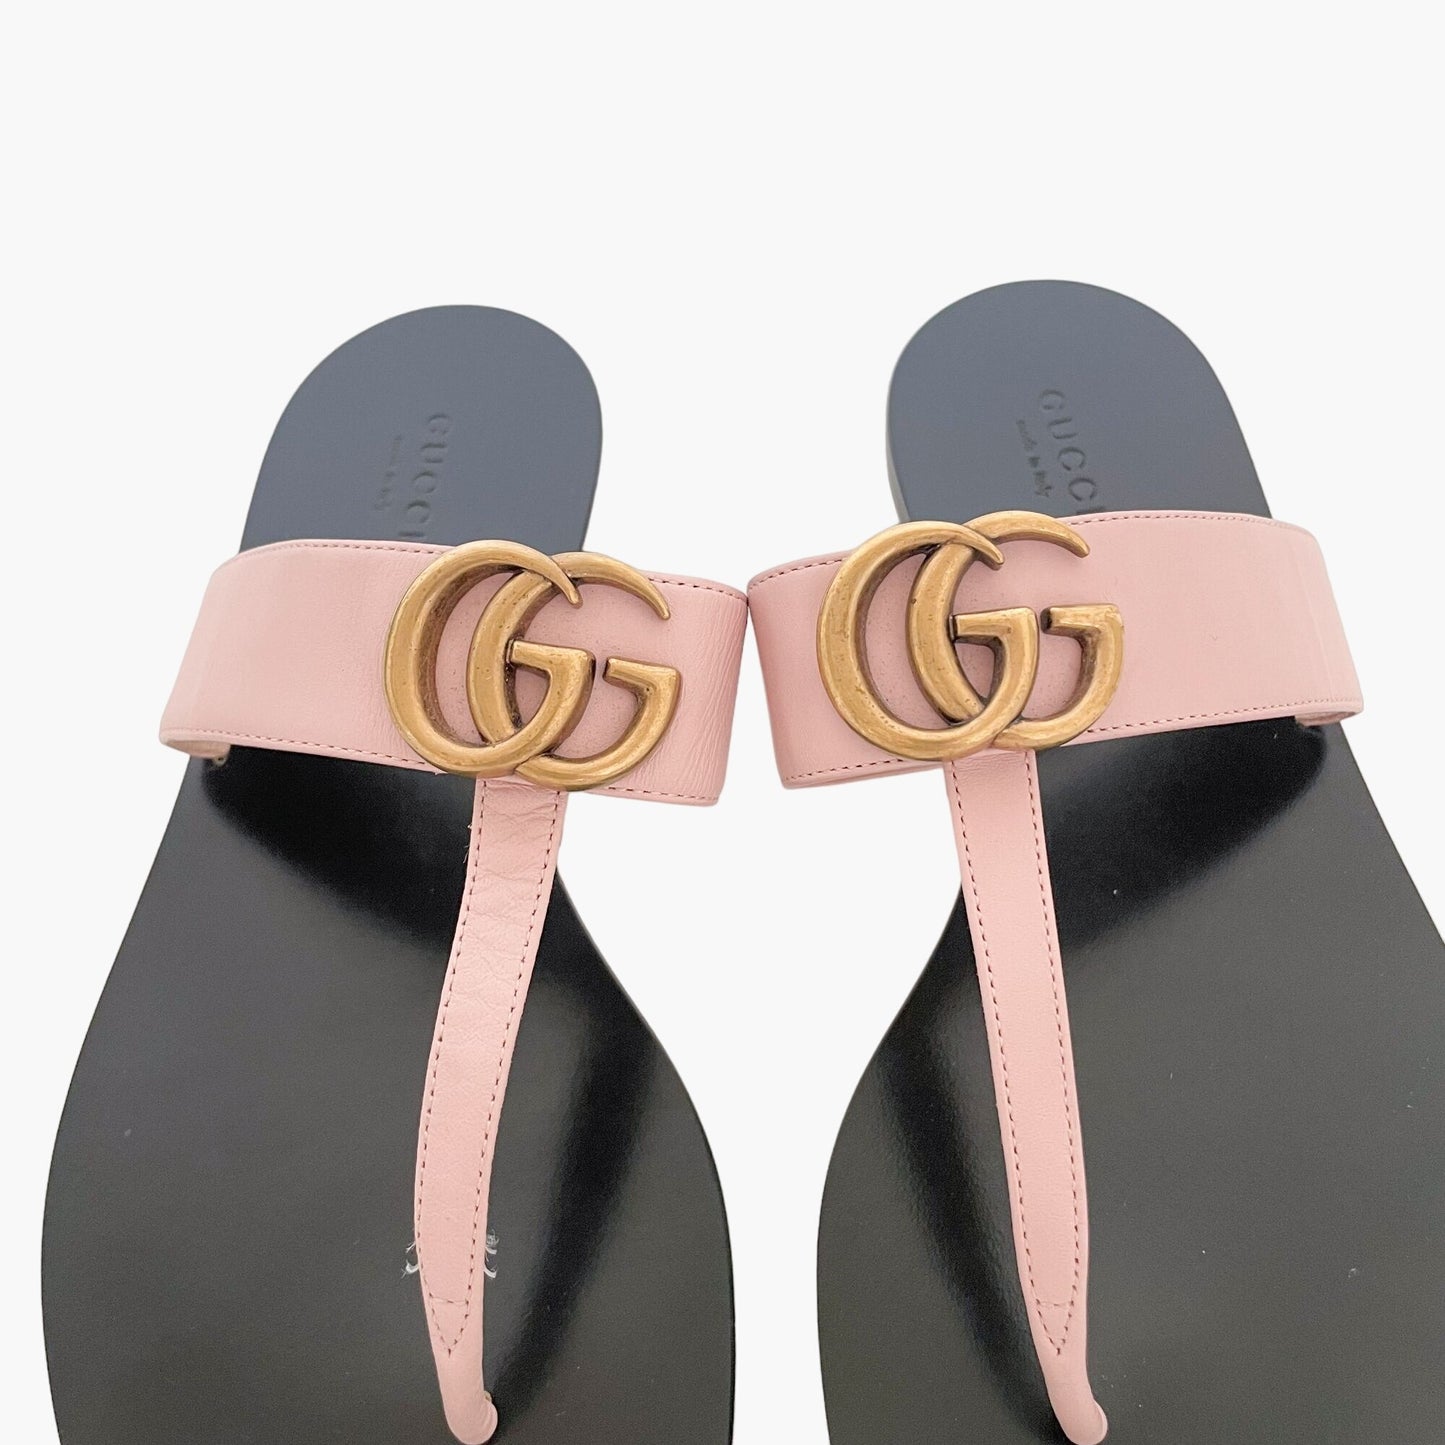 Gucci Marmont GG Thong Sandals in Light Pink Size 38